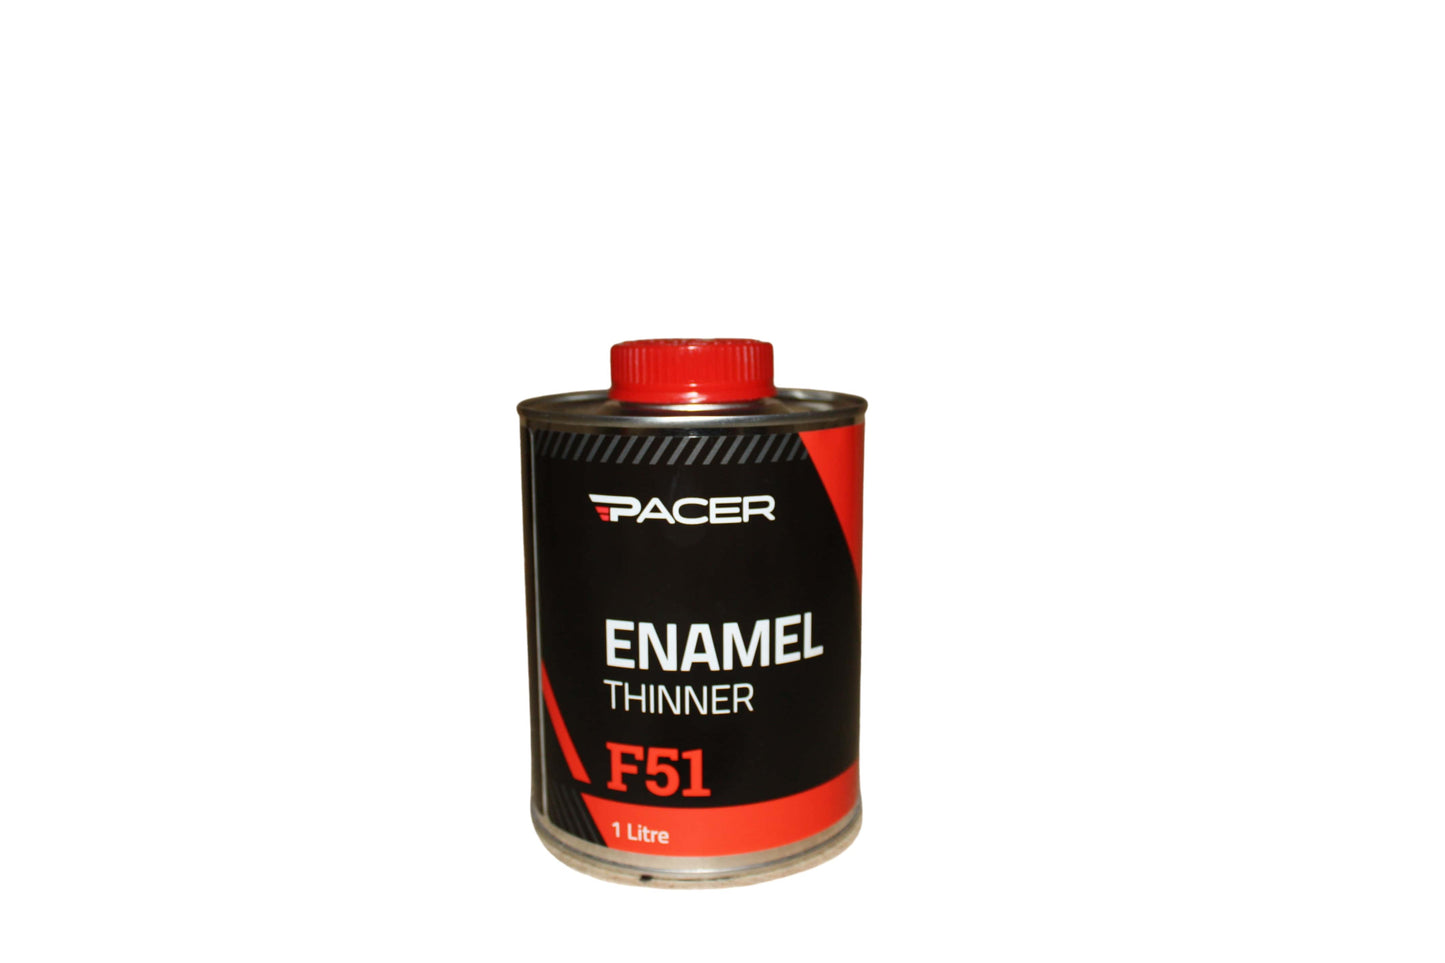 Pacer F51 Enamel Thinners